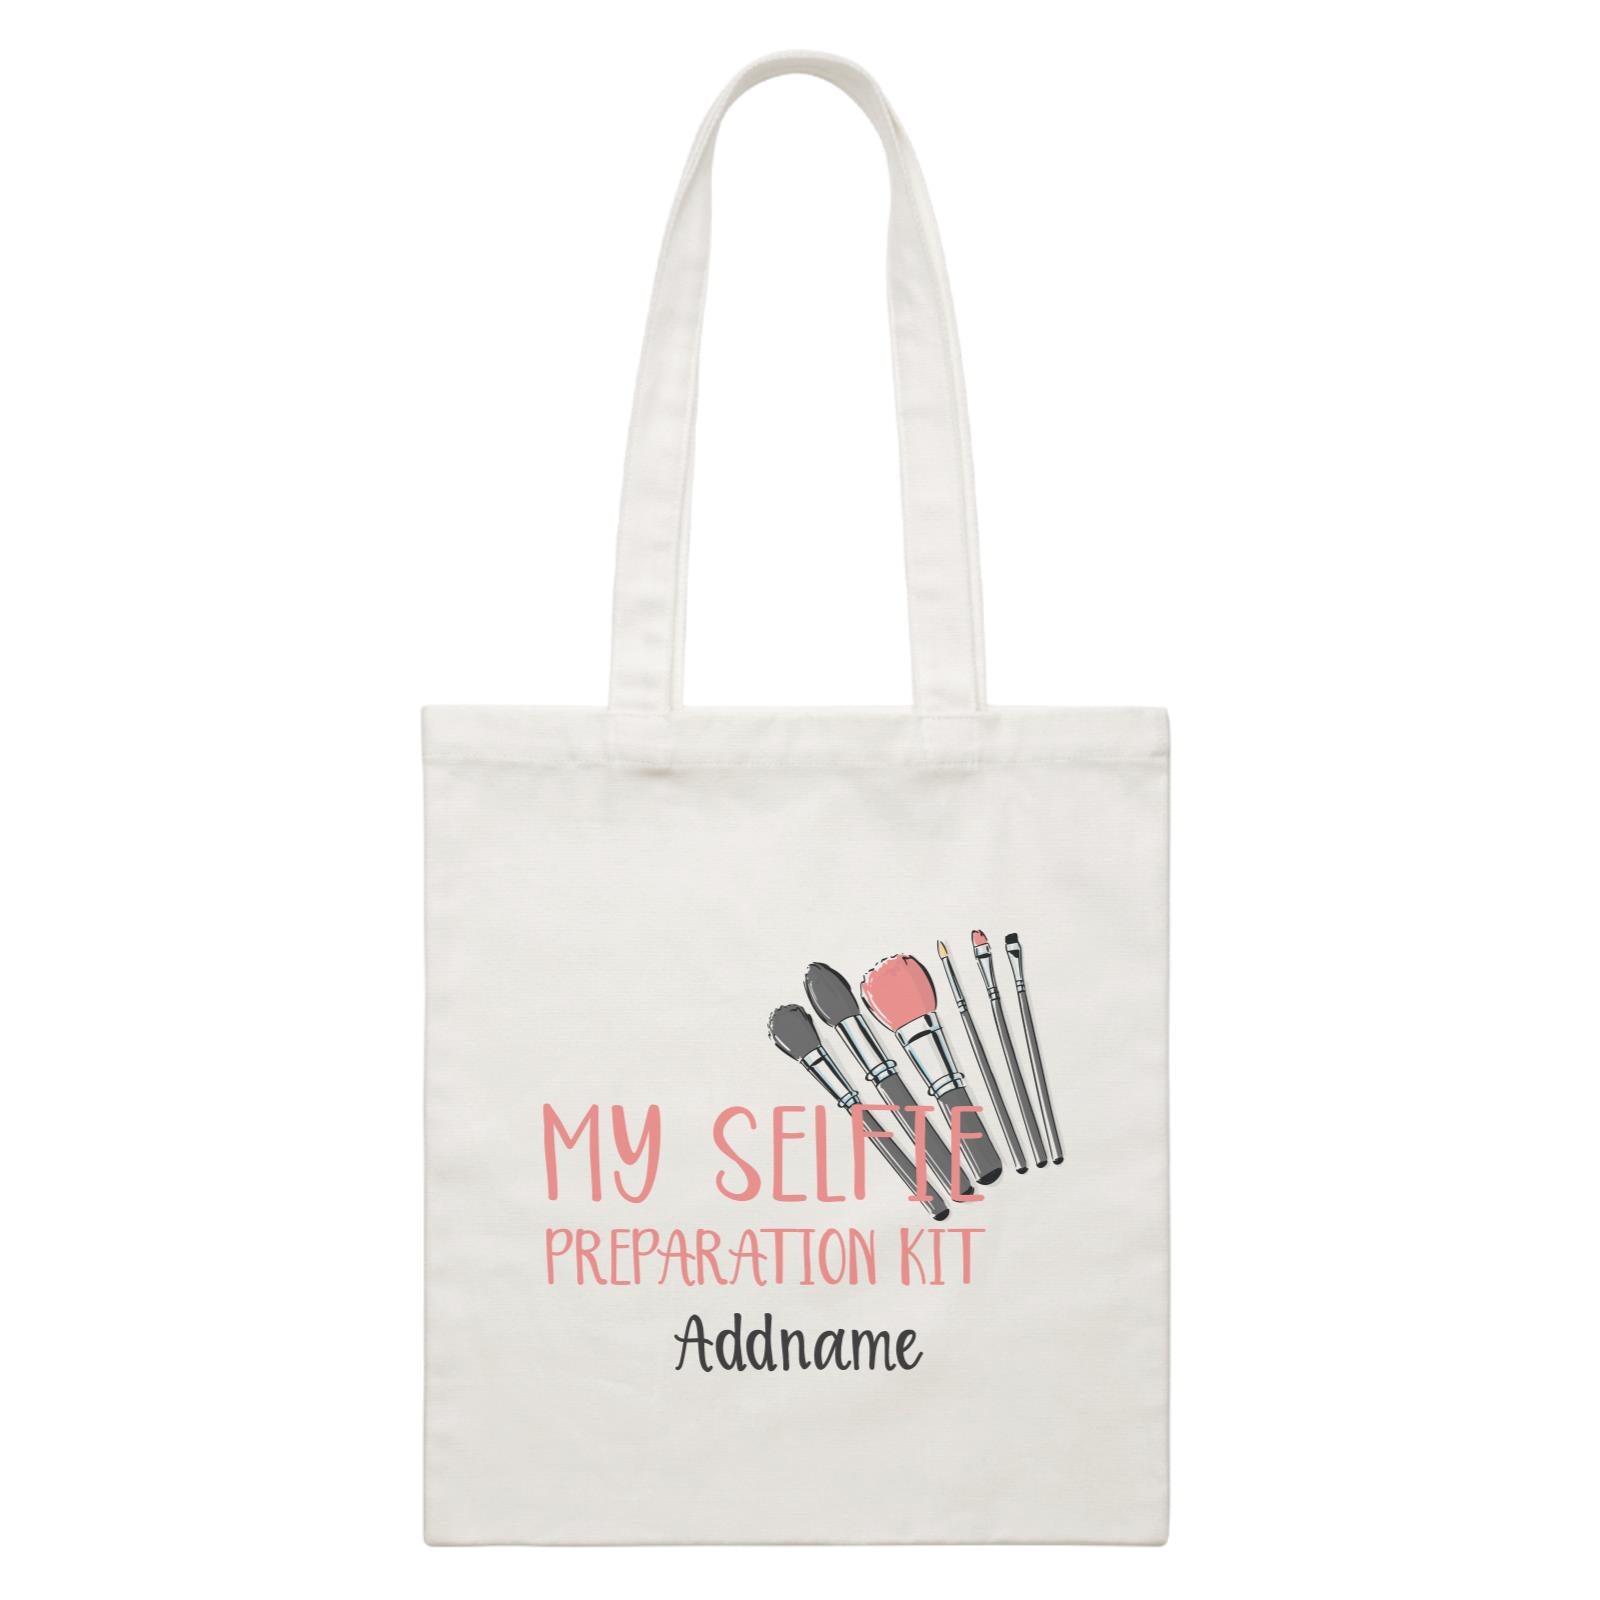 Make Up Quotes My Selfie Preparation Kit Addname White Canvas Bag